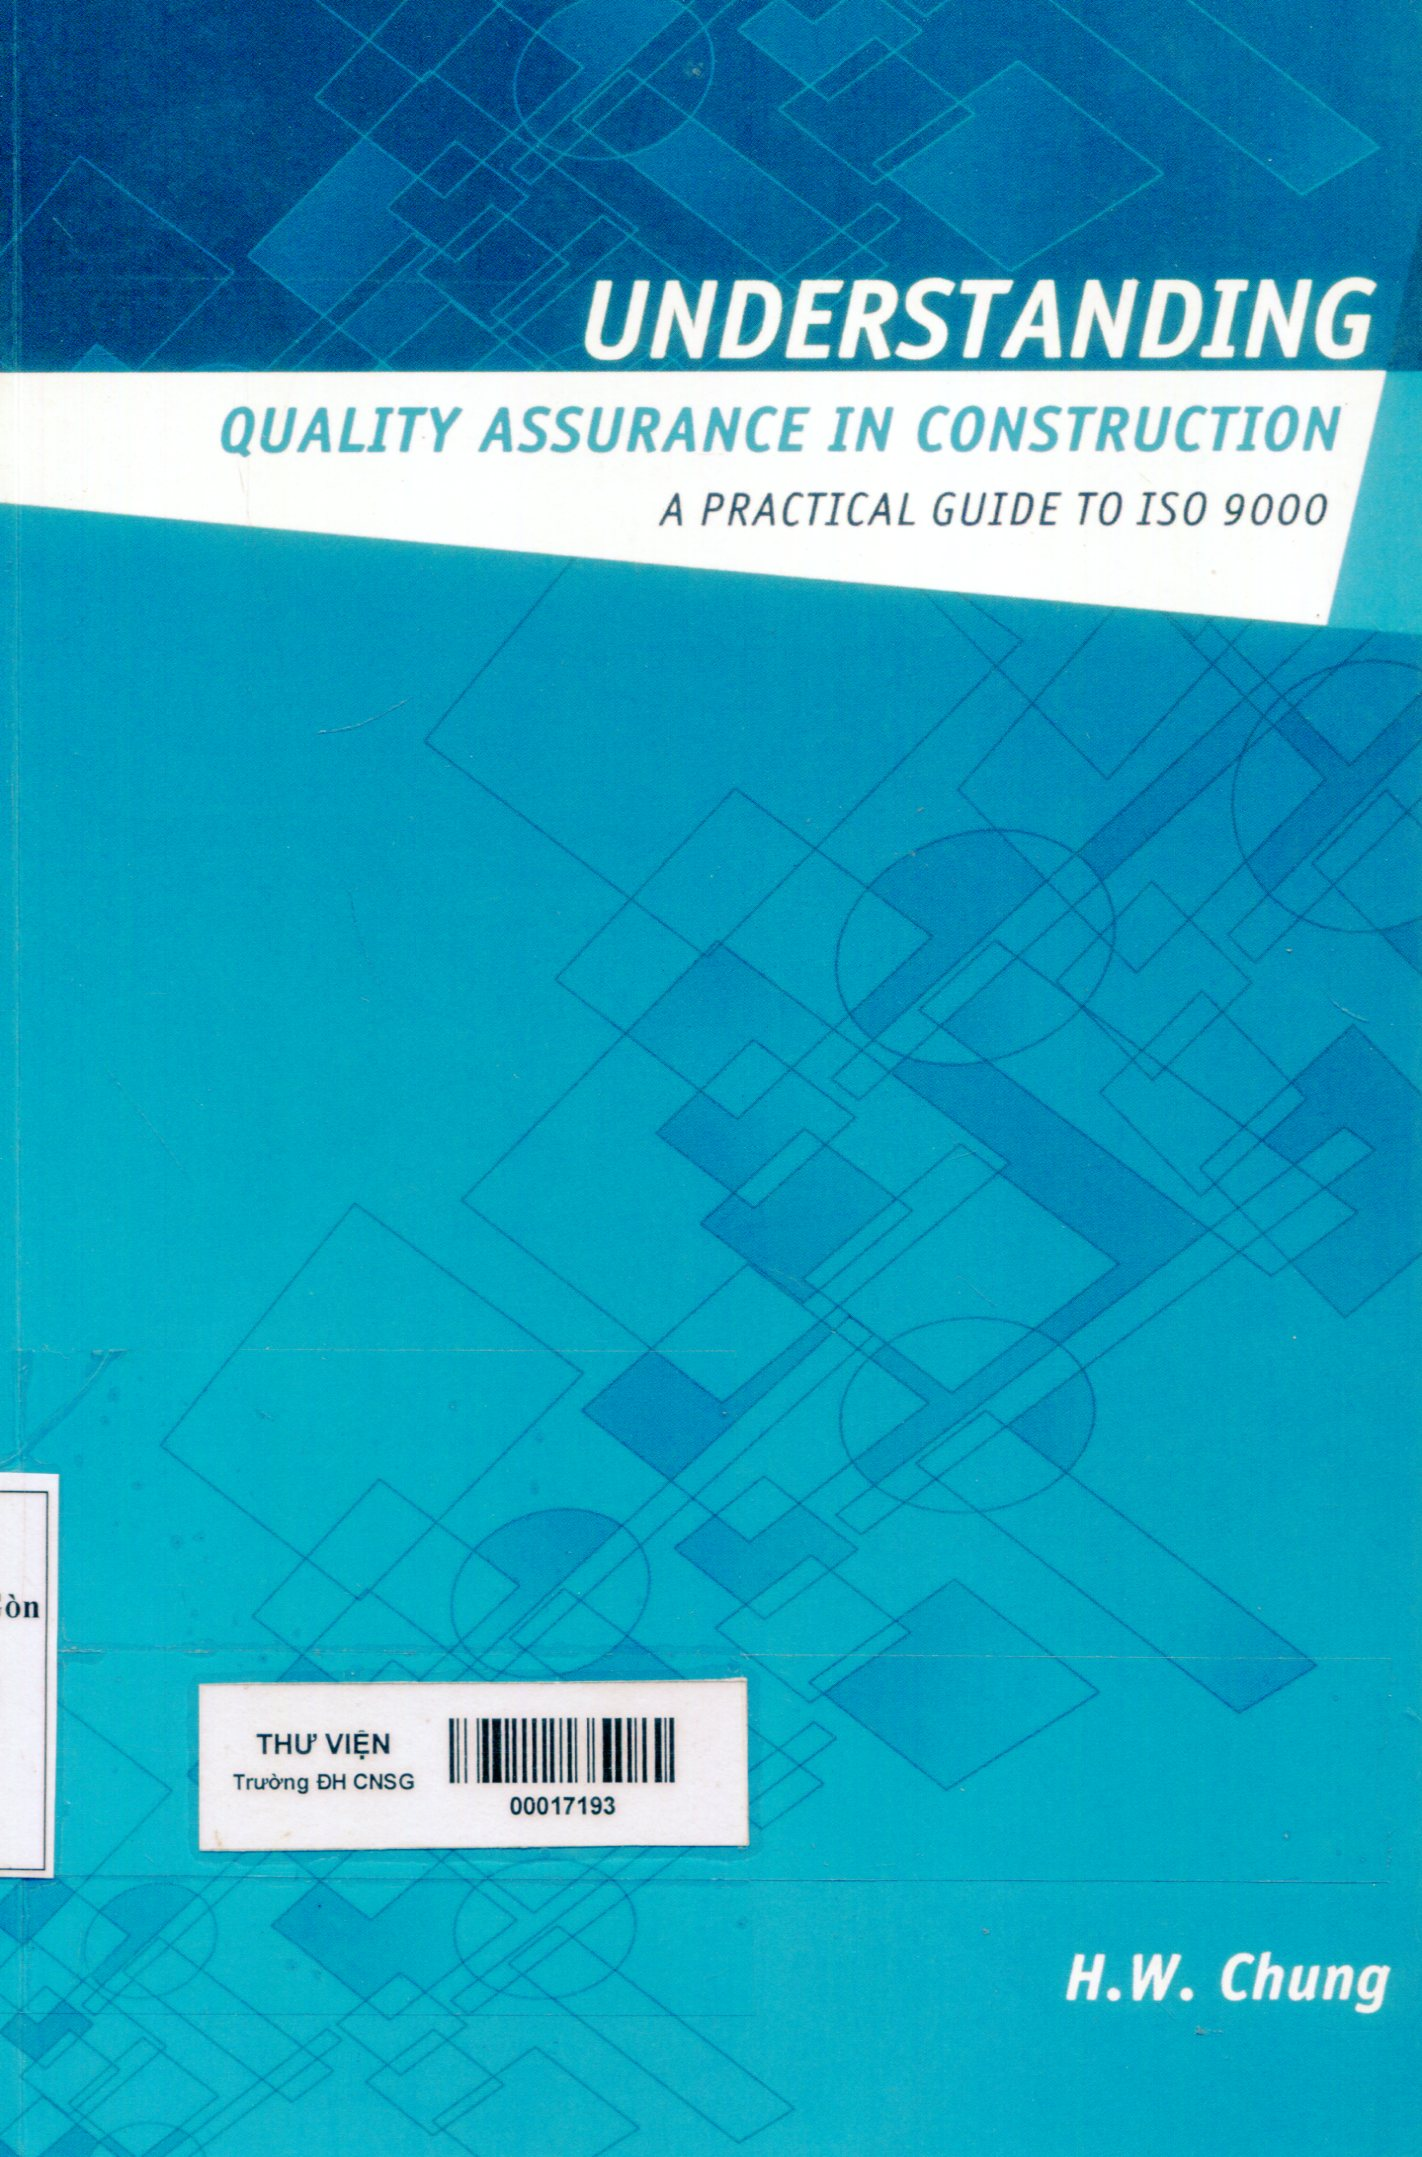 Understanding quality assurance in construction : a practical guide to ISO 9000 for contractors